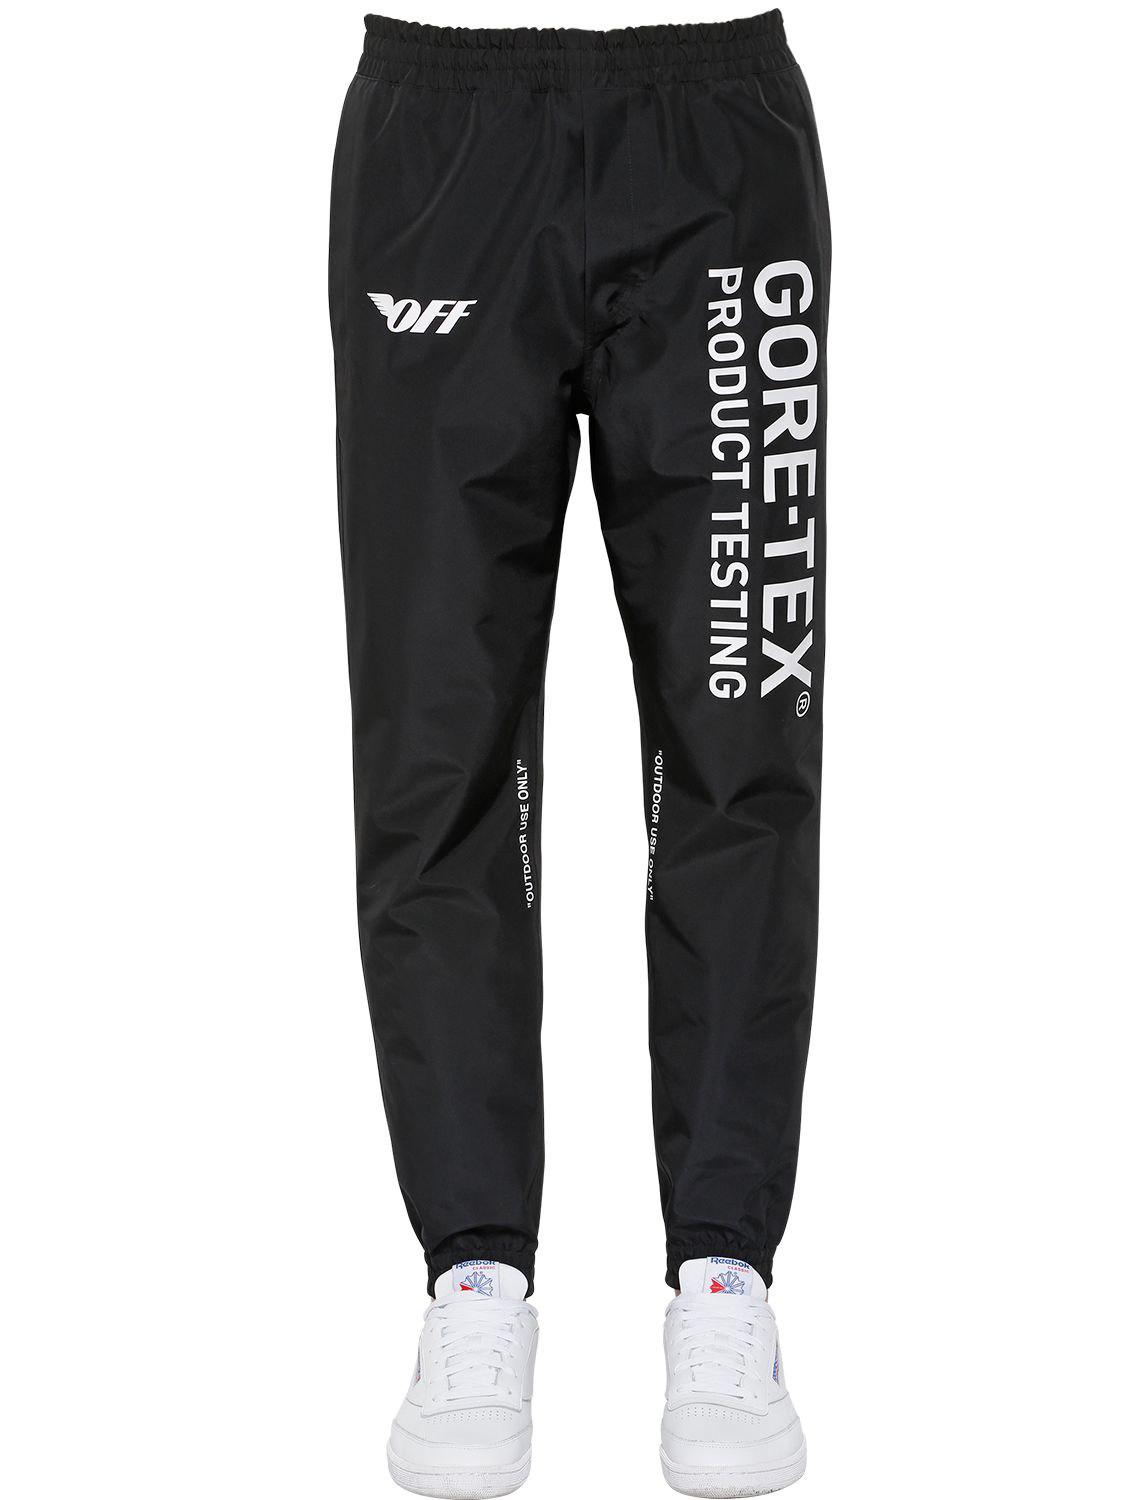 Off-White c/o Virgil Abloh Product Testing Gore-tex Track Pants in